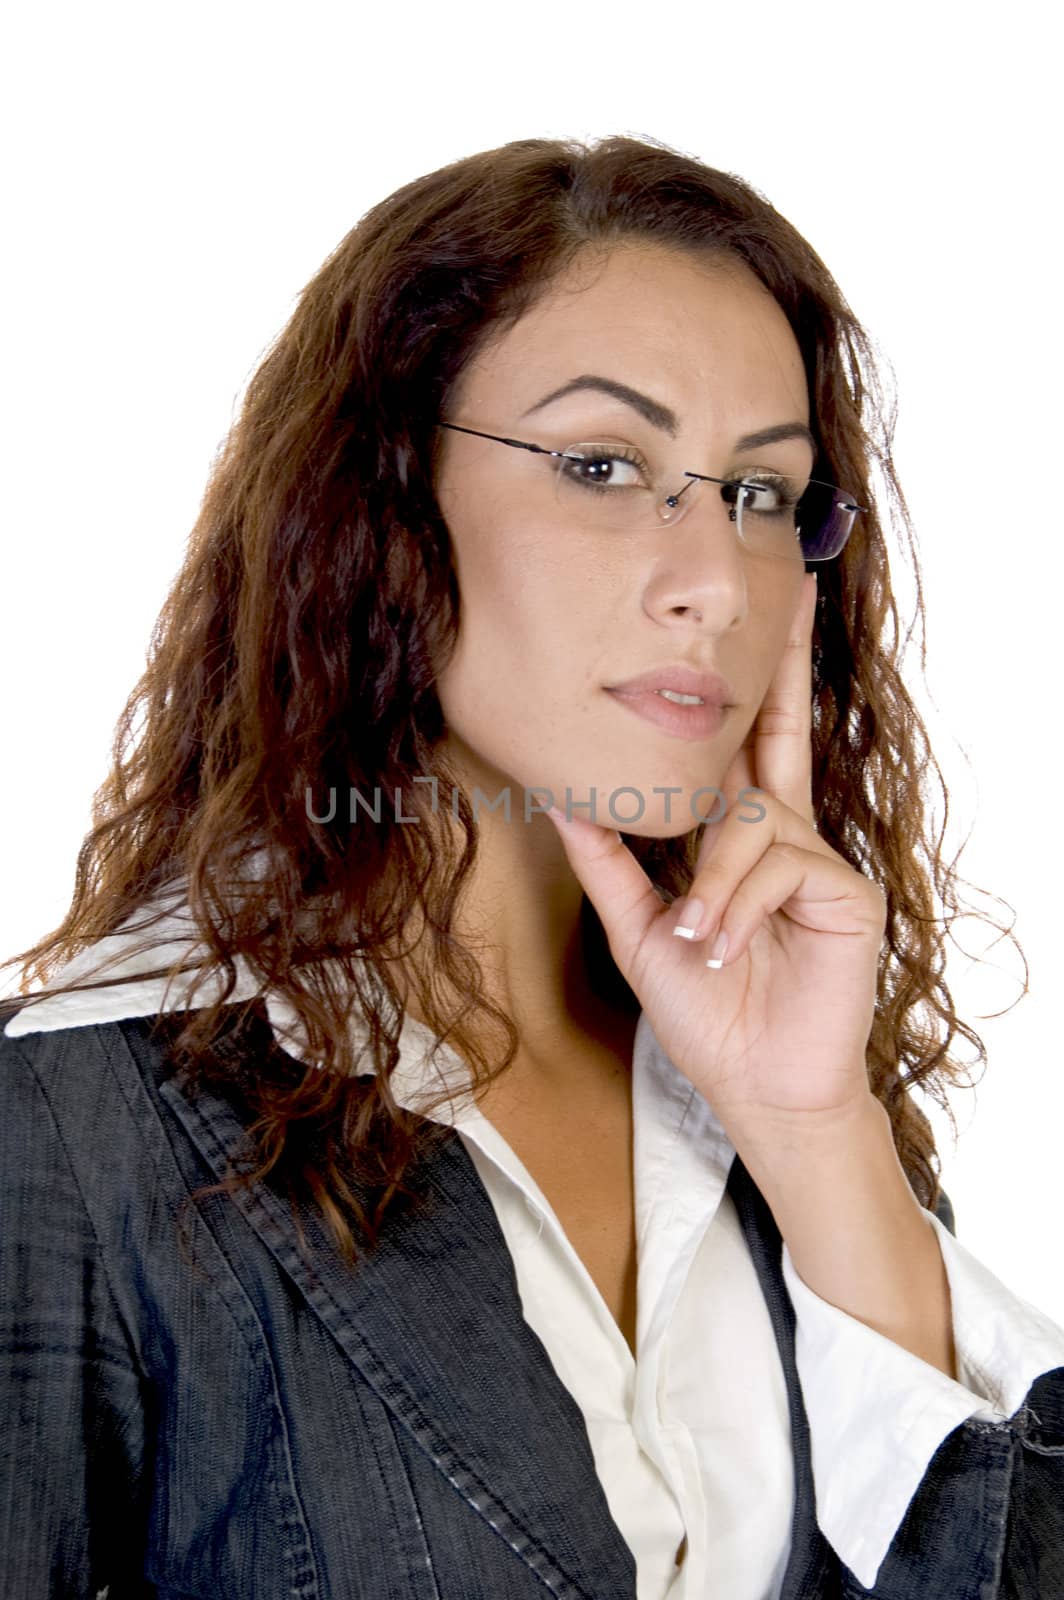 female in thinking pose on an isolated background